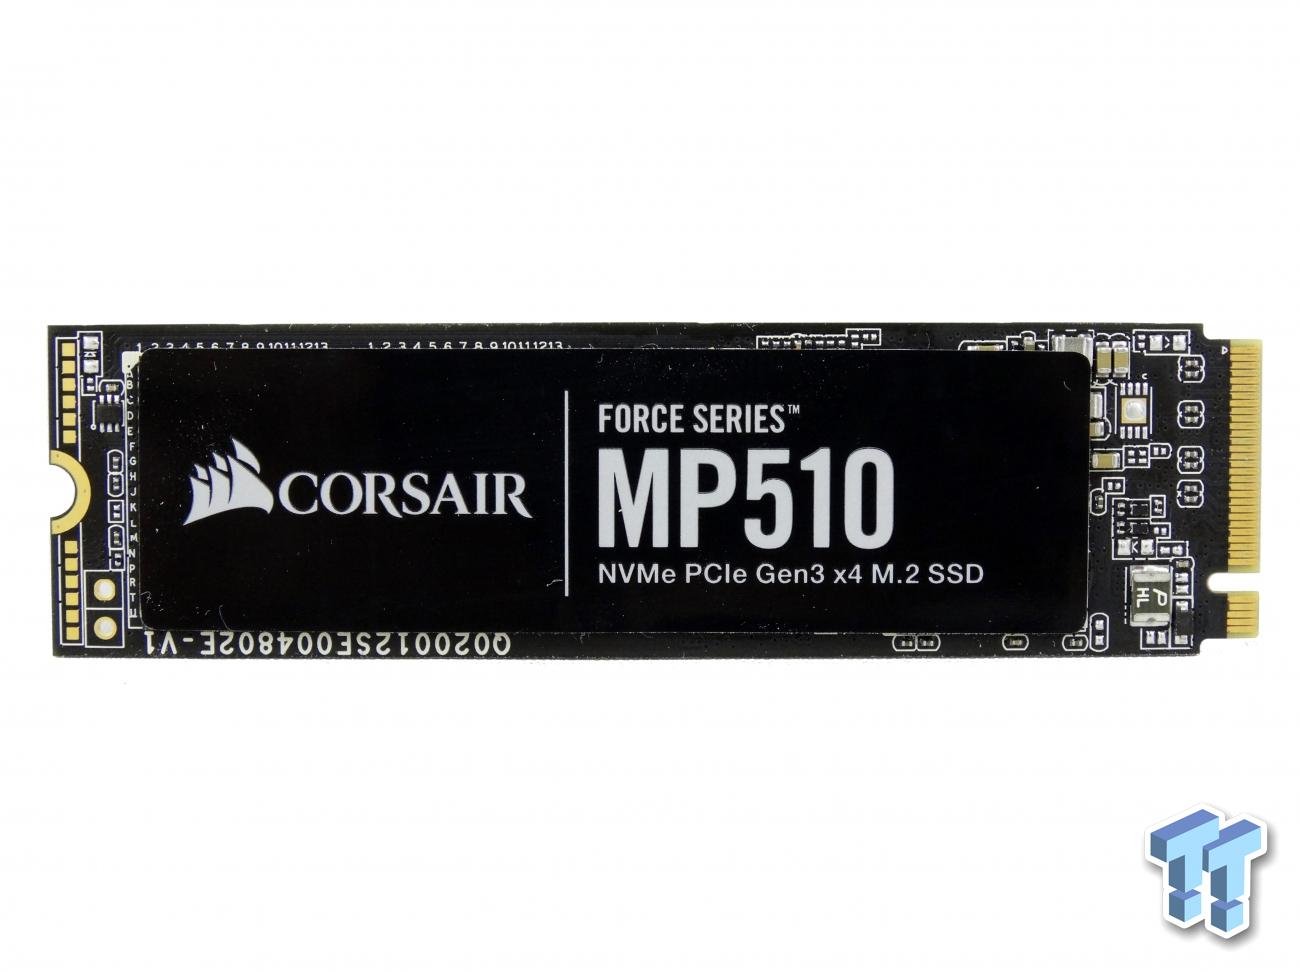 Corsair Force MP510 SSD Review - Fastest